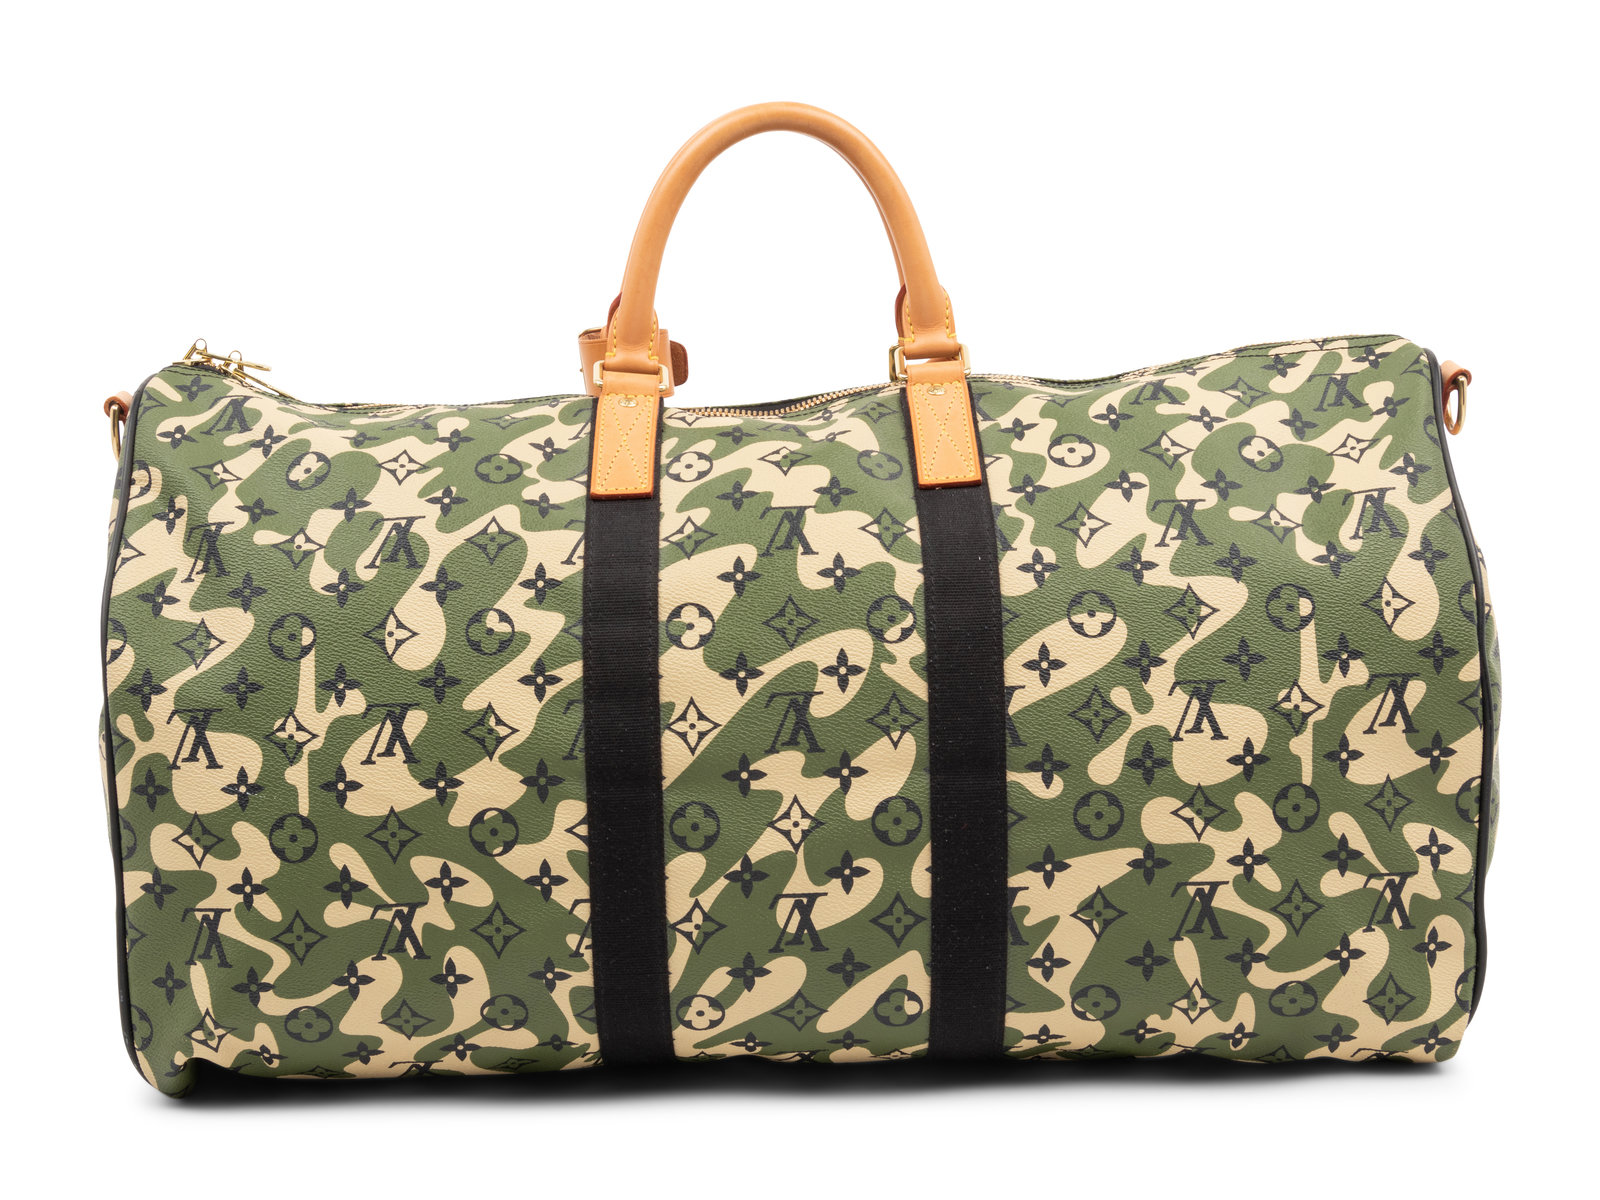 Louis Vuitton Limited Edition Keepall Bandoulière 55 in Monogramouflage  Coated Canvas, Takashi Murakami, 2008